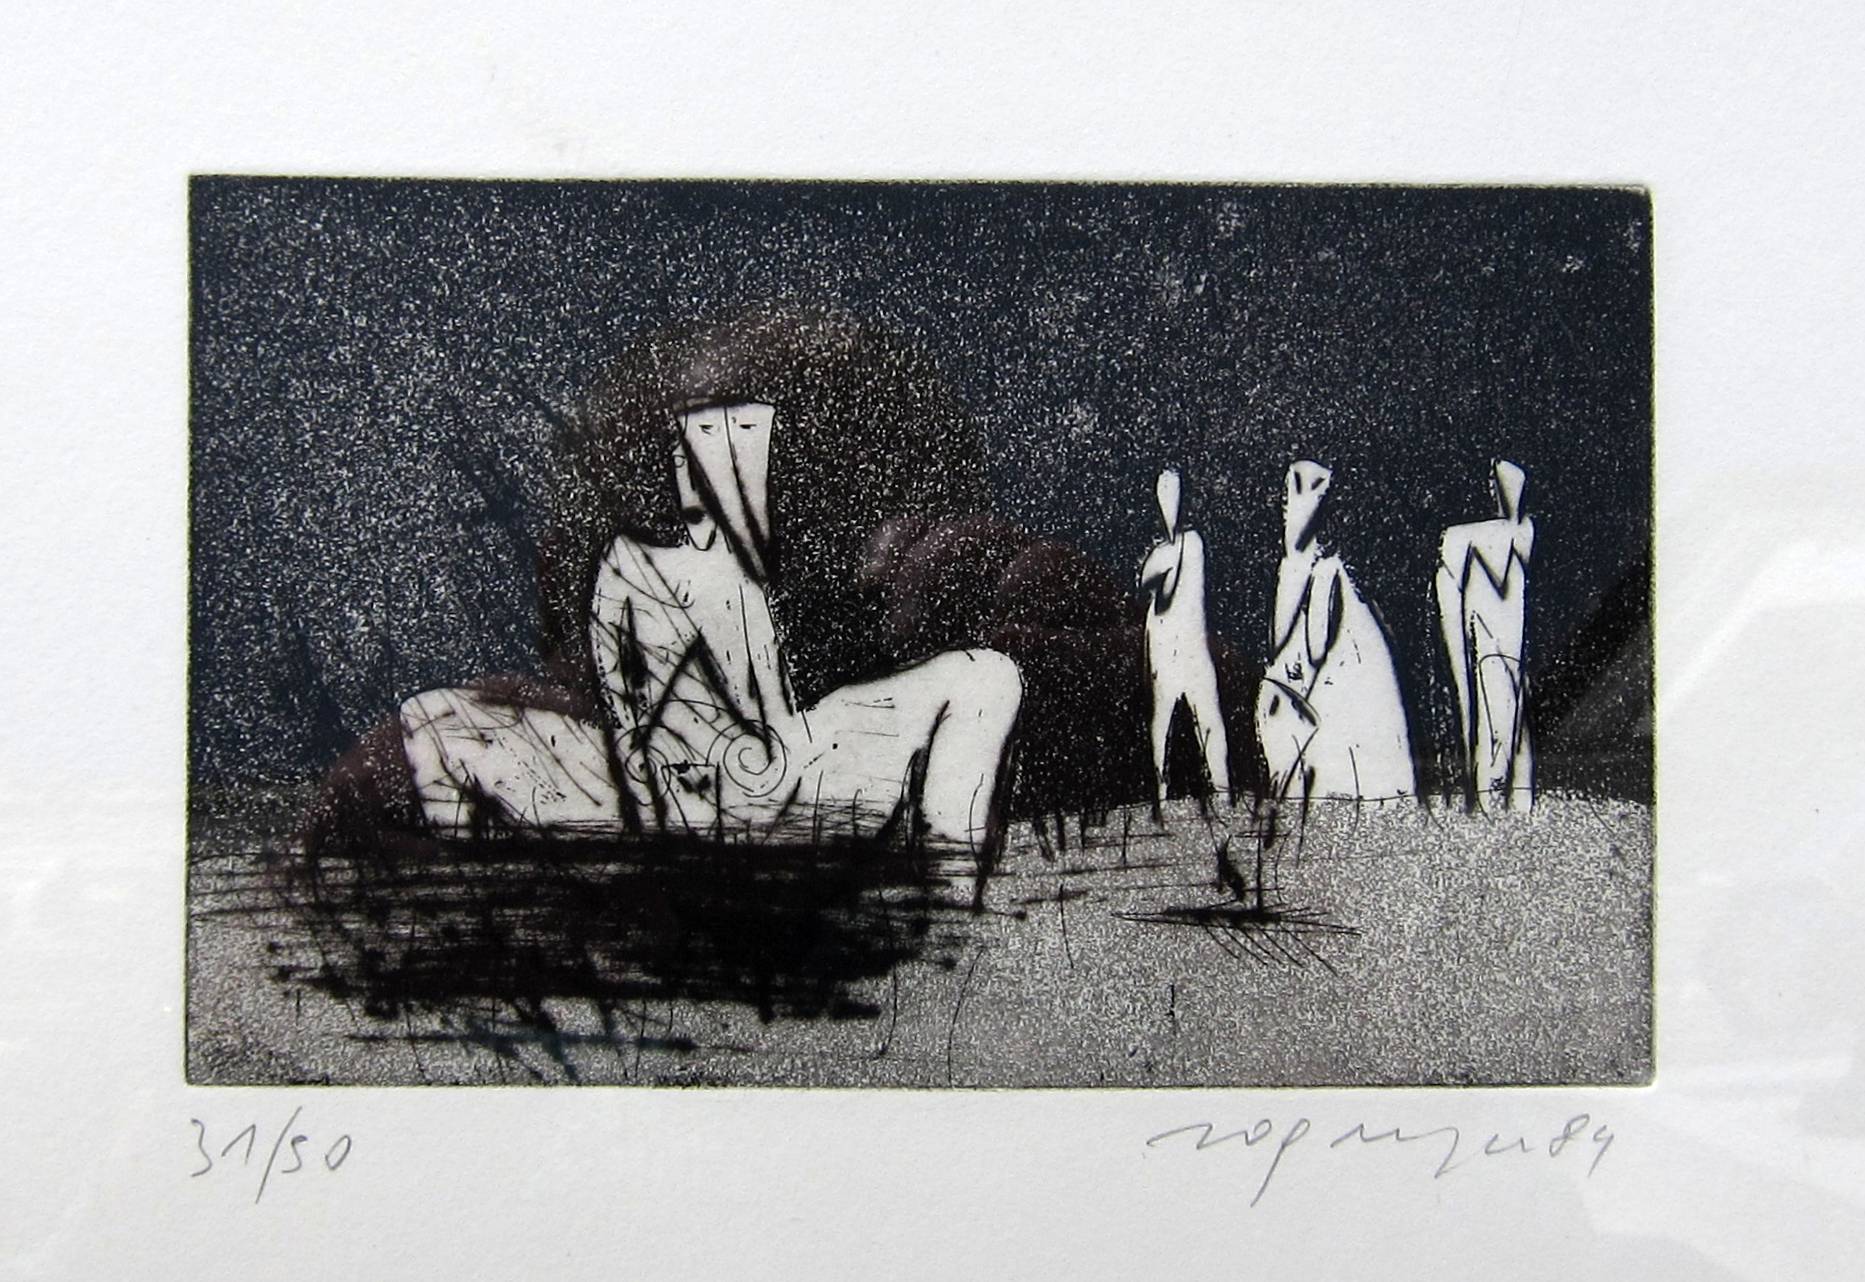 LEO ZOGMAYER [b.1949]. Four Figures, 1984. Etching, edition of 50, 37/50. Signed. 46 x 34 cm [